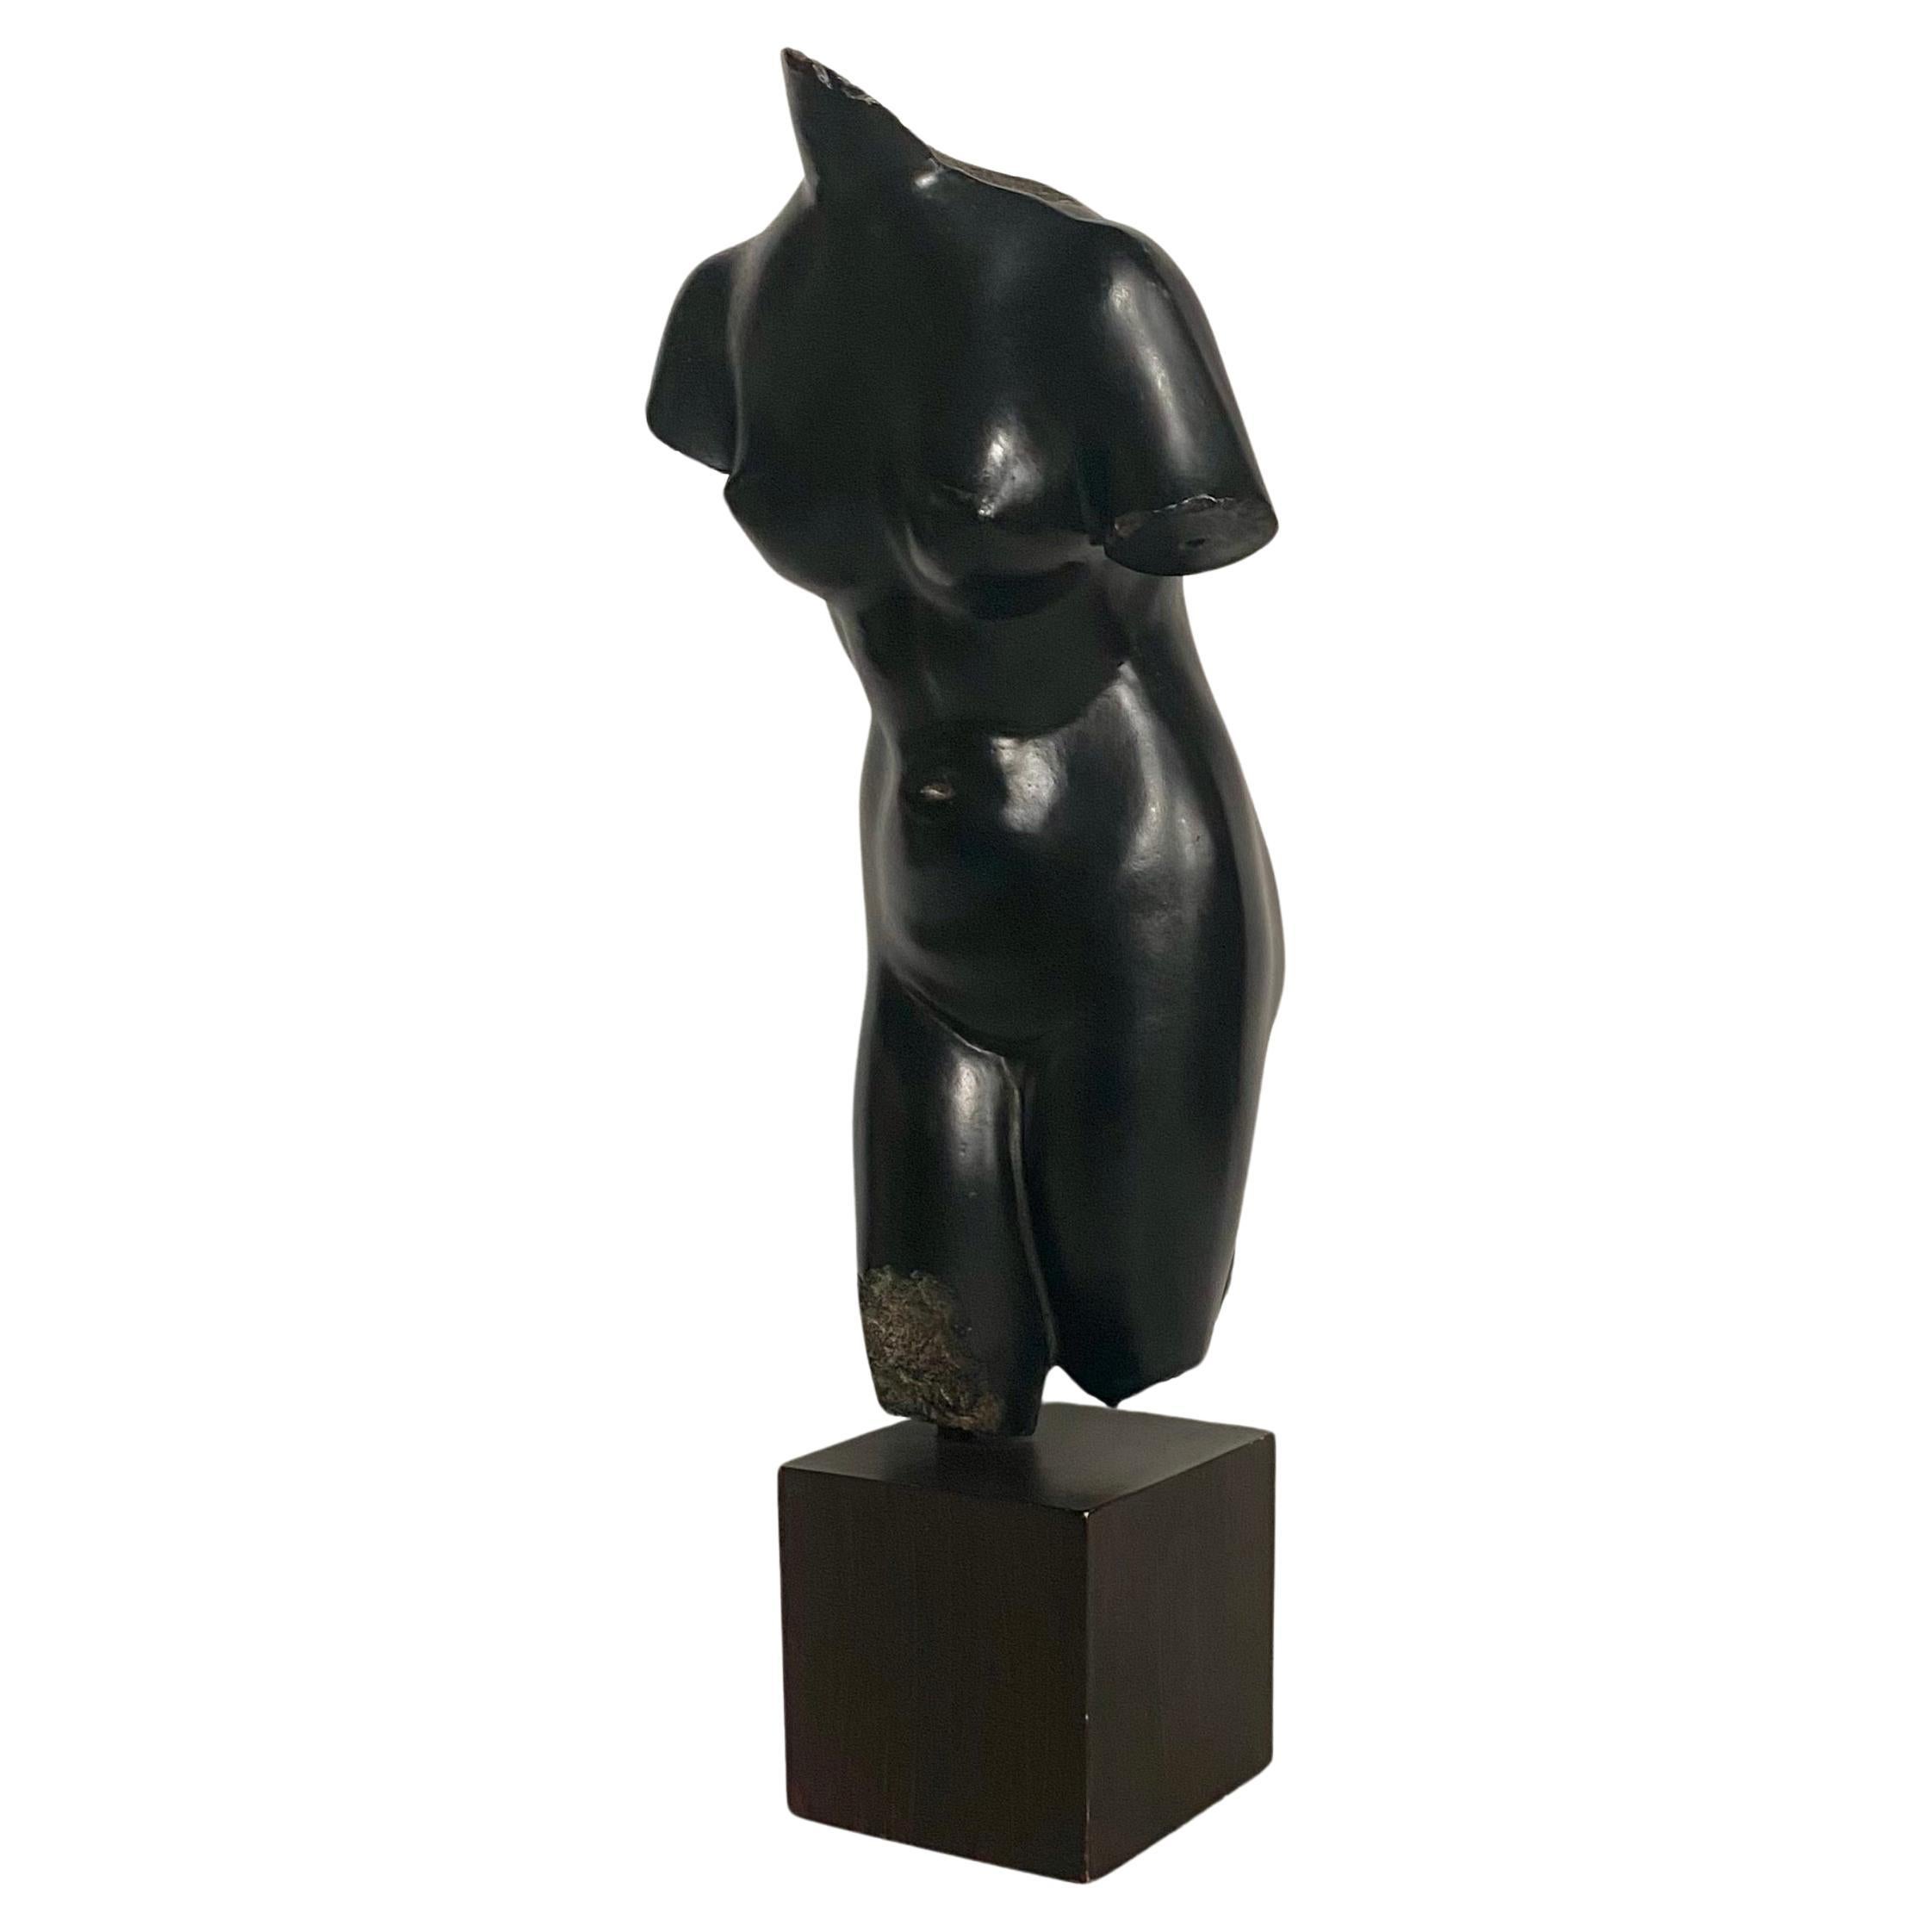 Fabulous reproduction cast resin sculpture of Aphrodite from The Metropolitan Museum of Art, NYC.  This classical figural sculpture features a black finish and is mounted on a square wood grain plinth base.  Original museum label to underside of